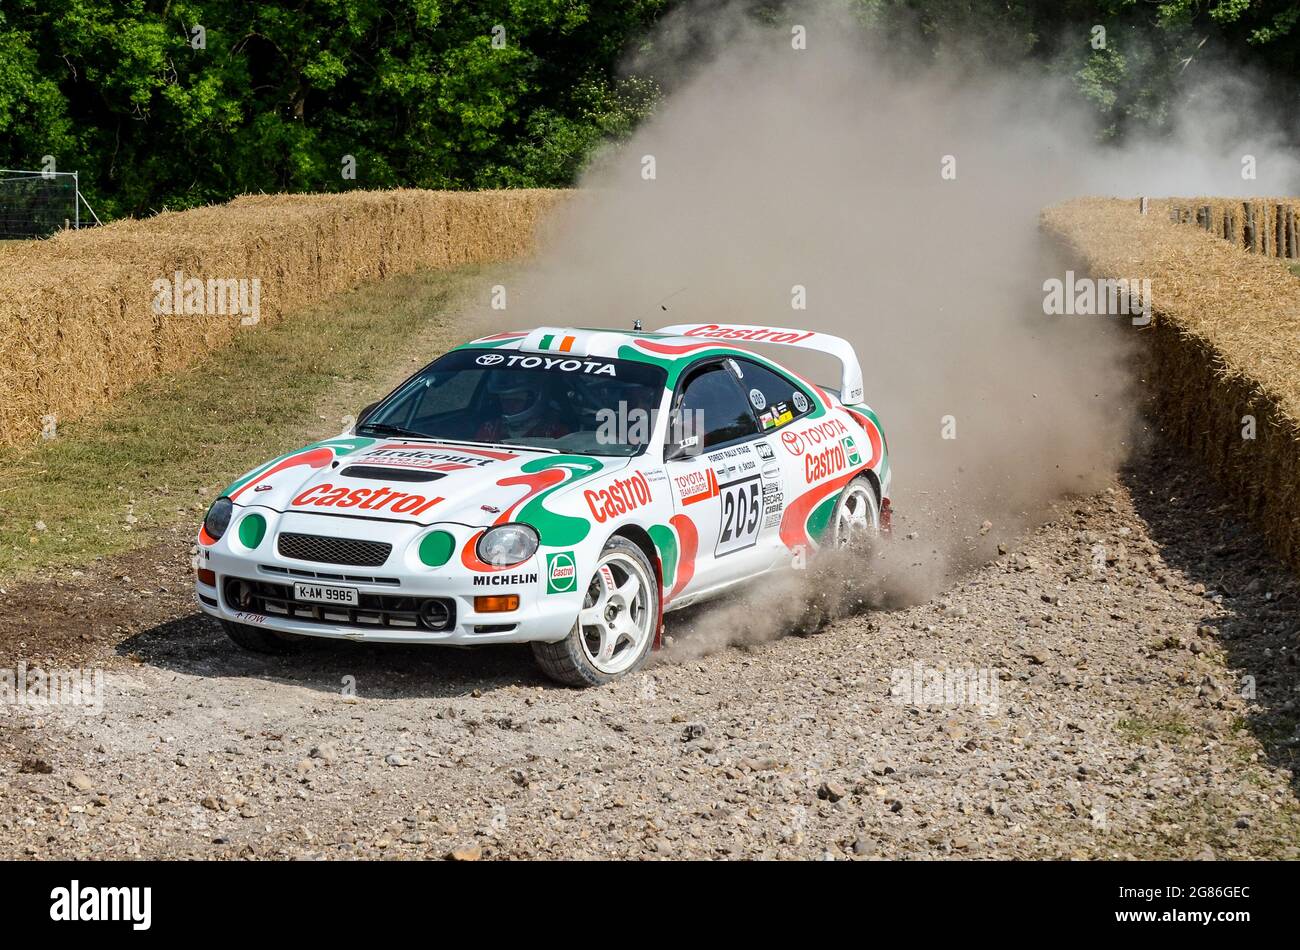 Toyota Celica GT Four ST205 rally car on the rally stage at the Goodwood Festival of Speed 2013. Castrol sponsorship colour scheme Stock Photo